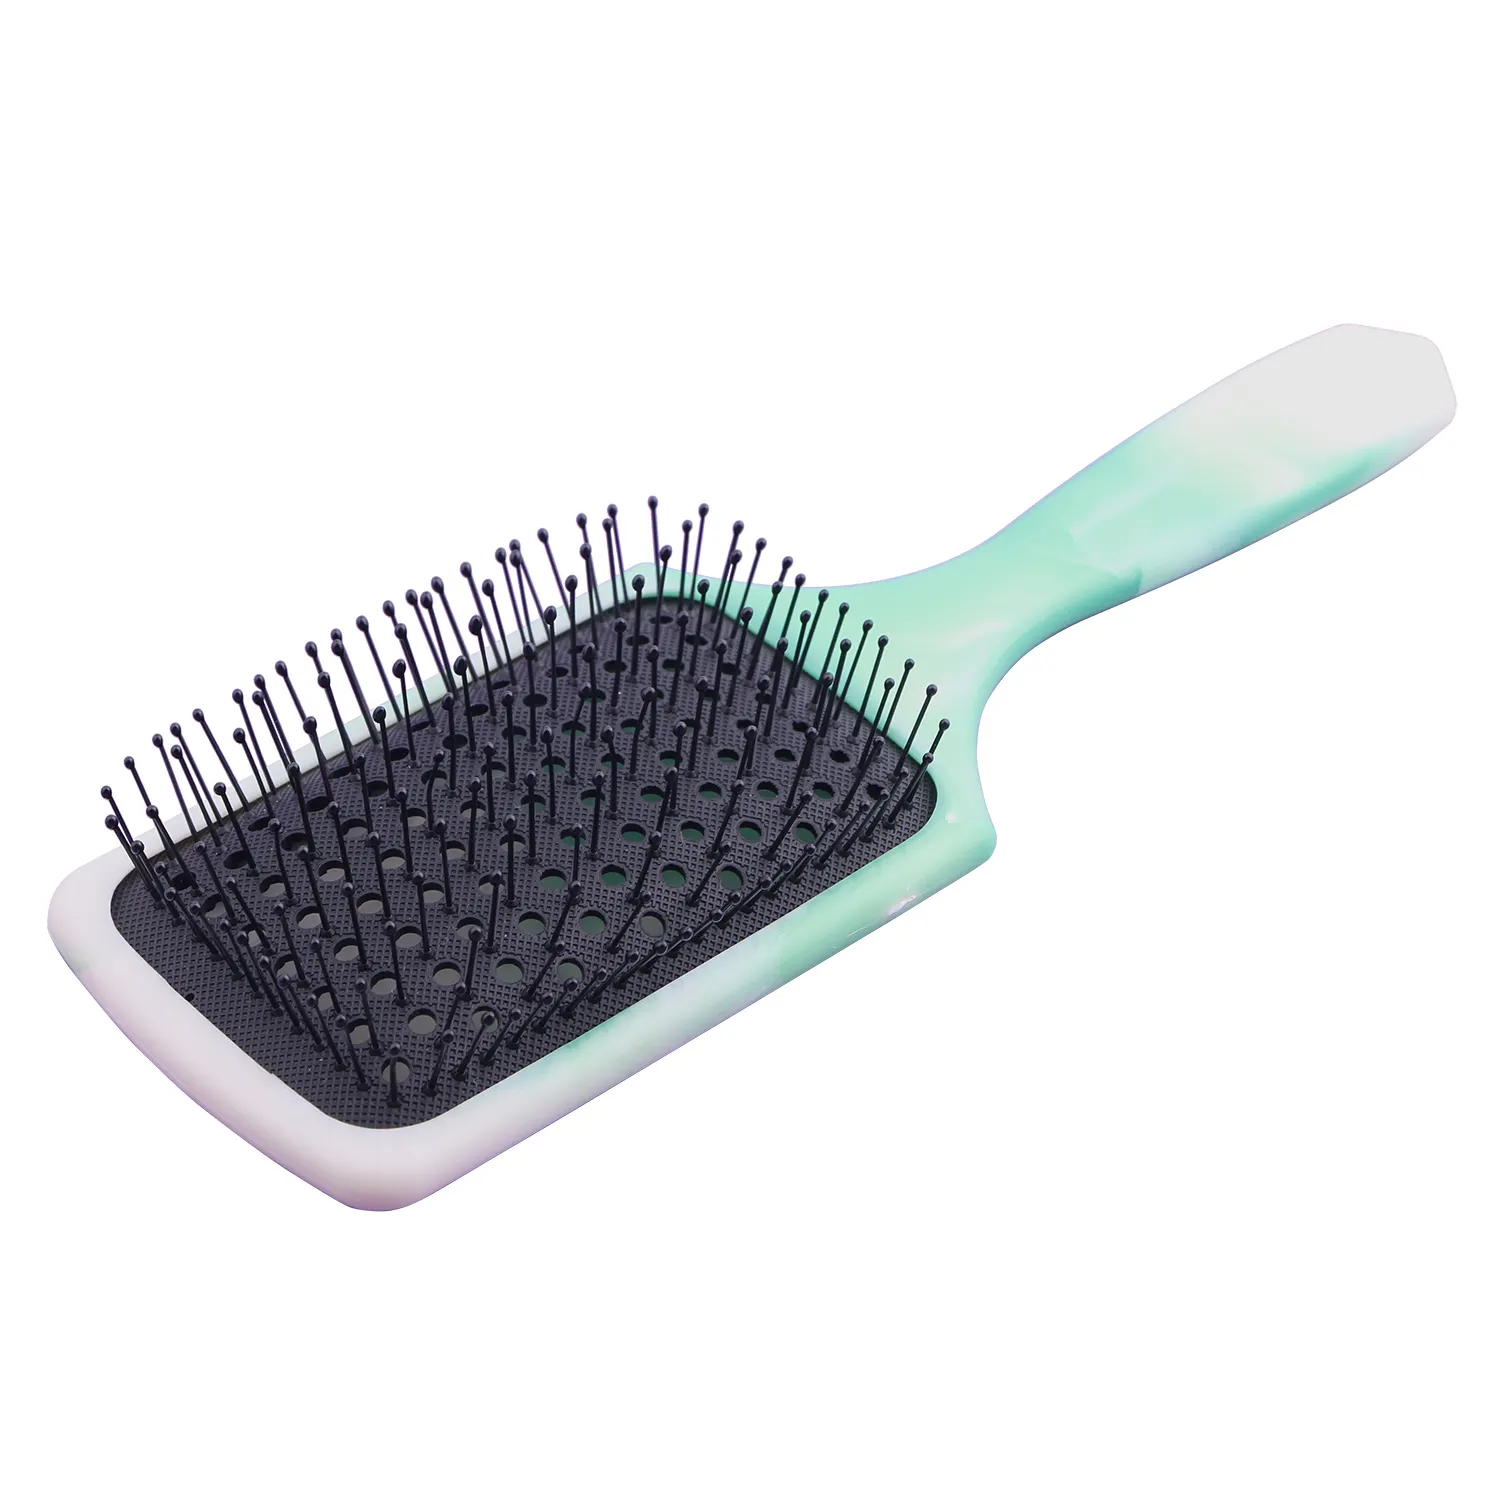 Customized Hot Sale Latest Plastic Cushion Detangling Paddle Hair Brush Comb Hair Styling Tools for Wet or Dry Hair